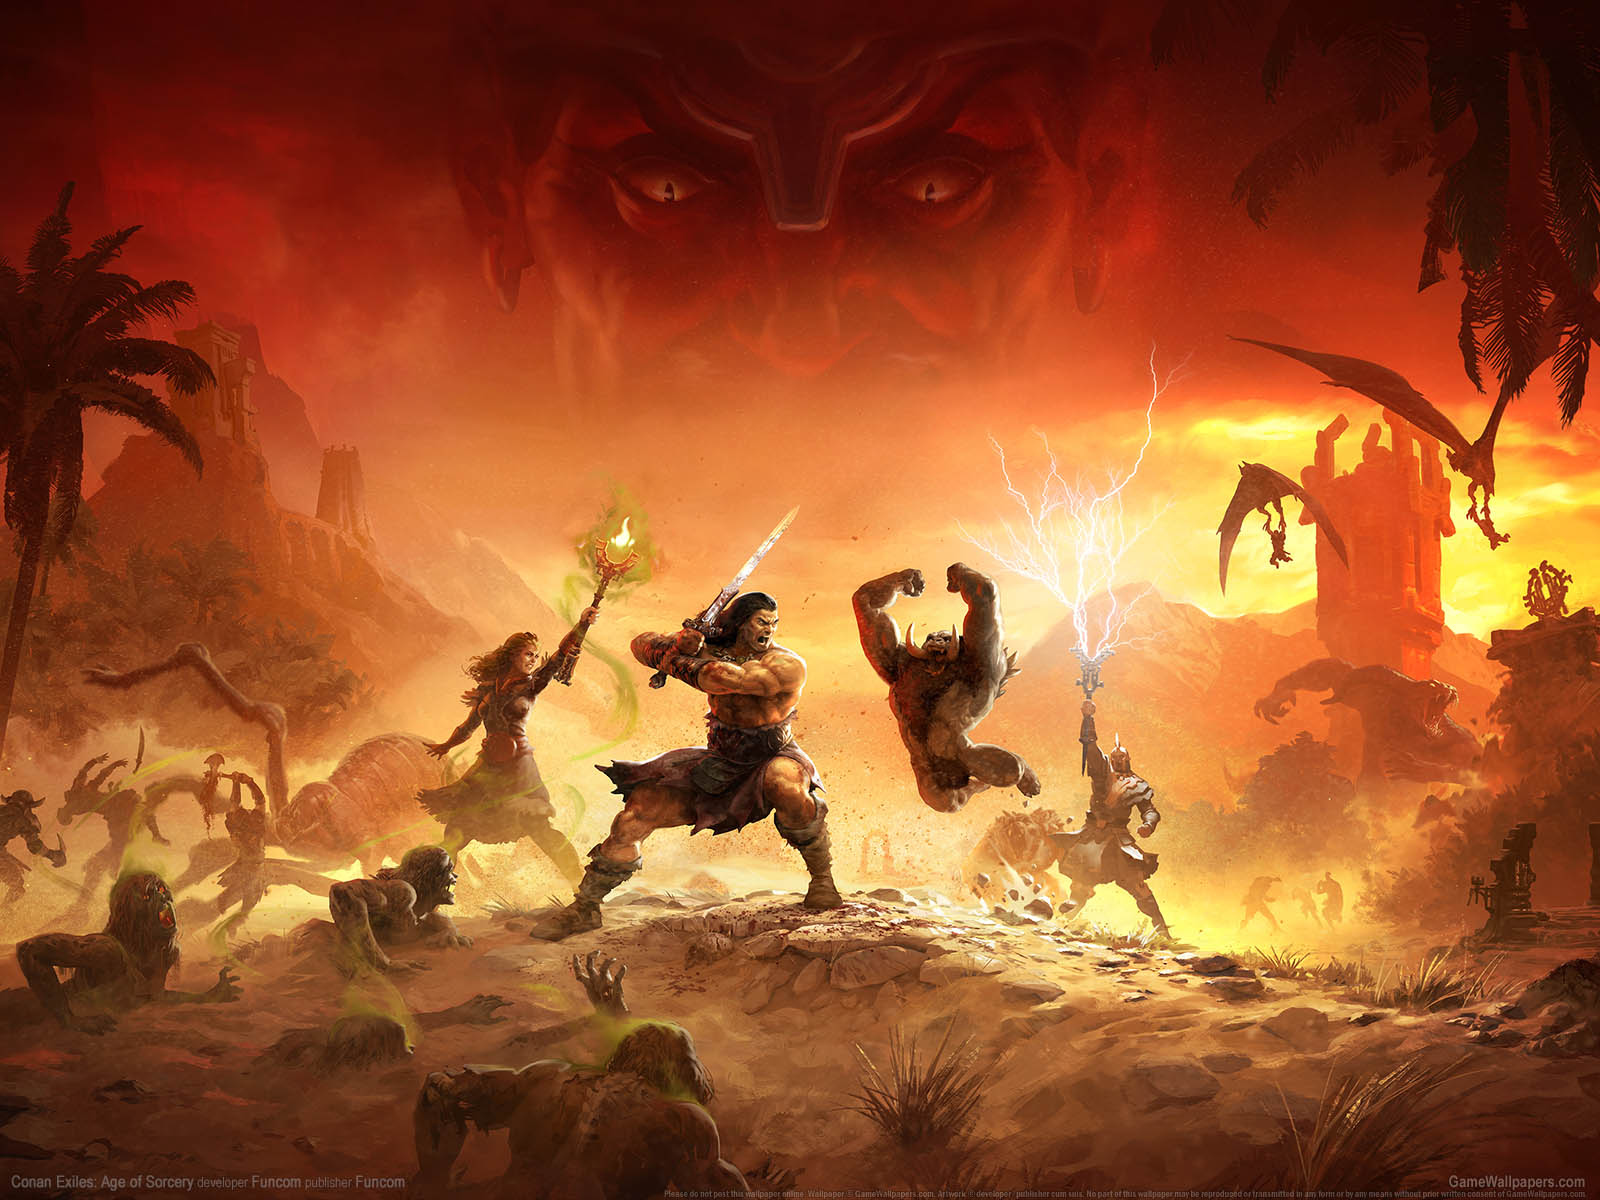 Conan Exiles%253A Age of Sorcery achtergrond 01 1600x1200